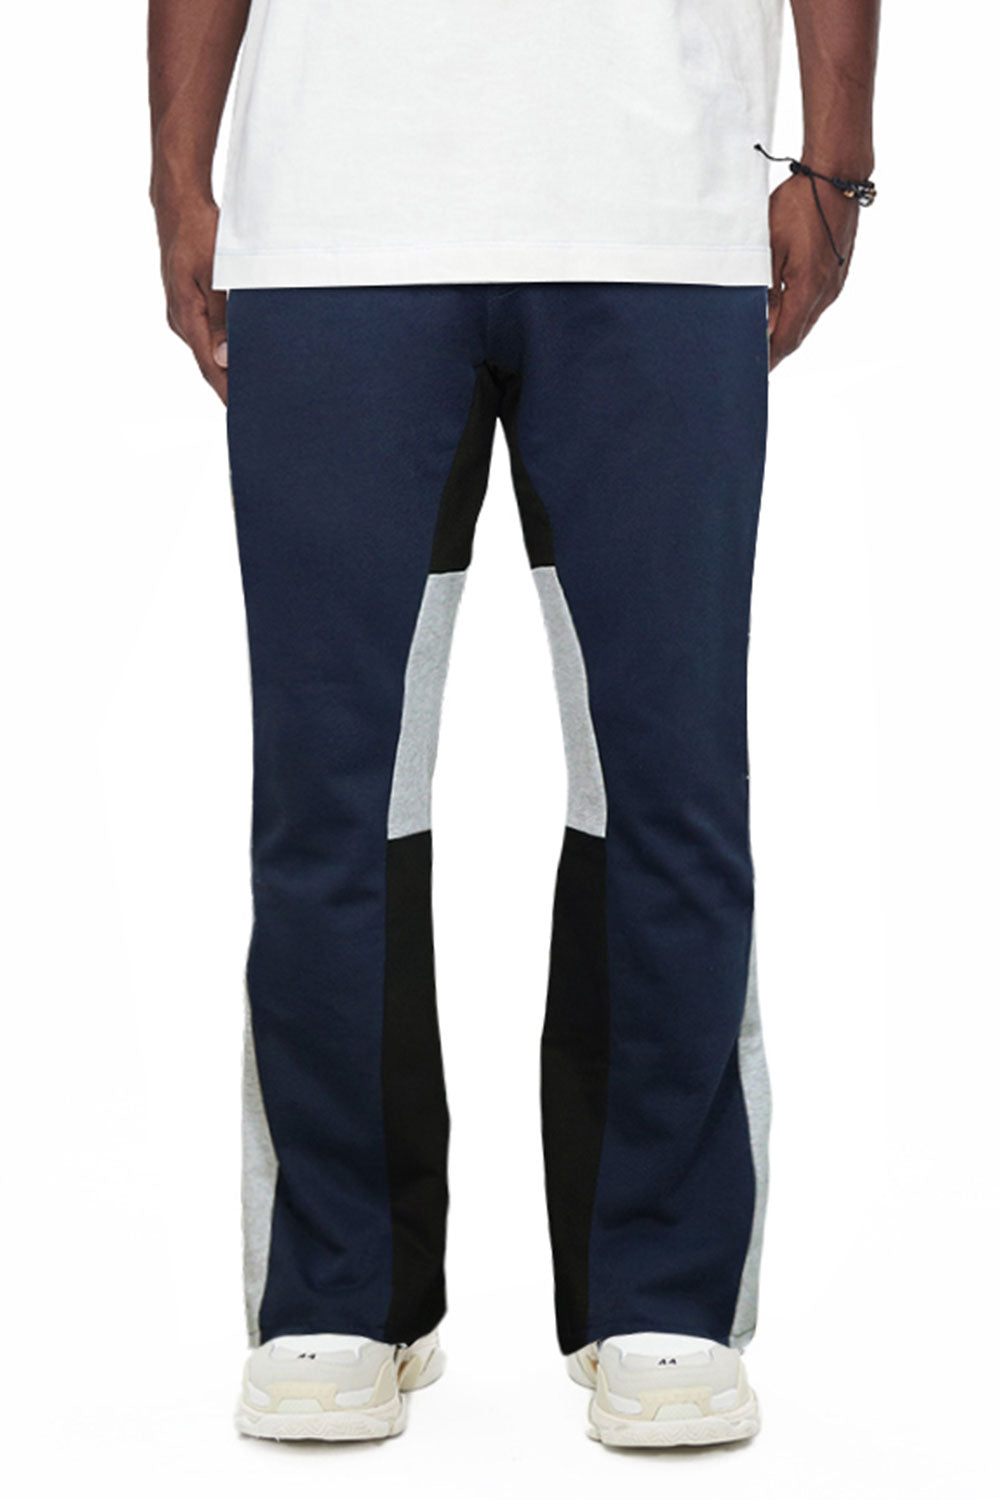 Gingtto Contrast Bootcut Weatpants For Sale – GINGTTO